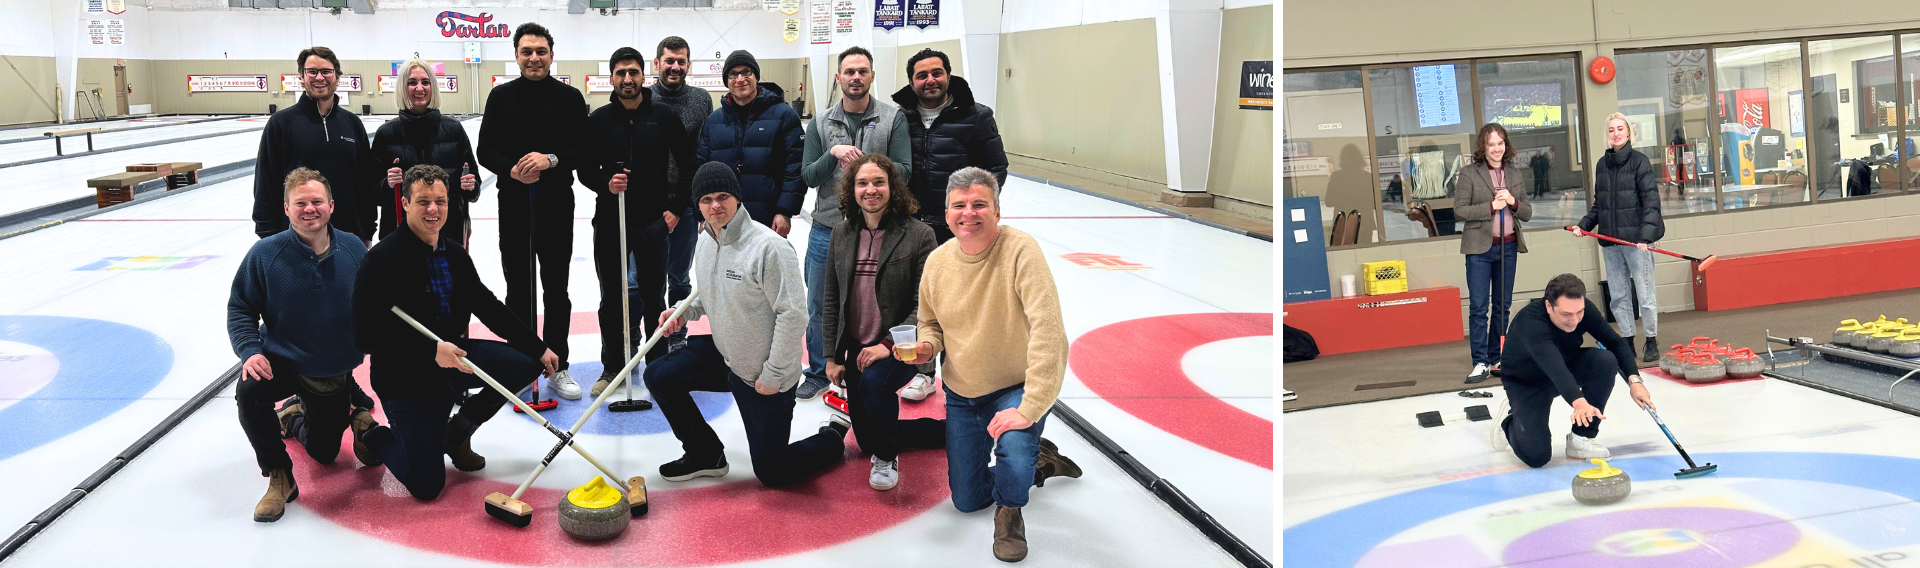 Curling at the Calledonian Curling Club